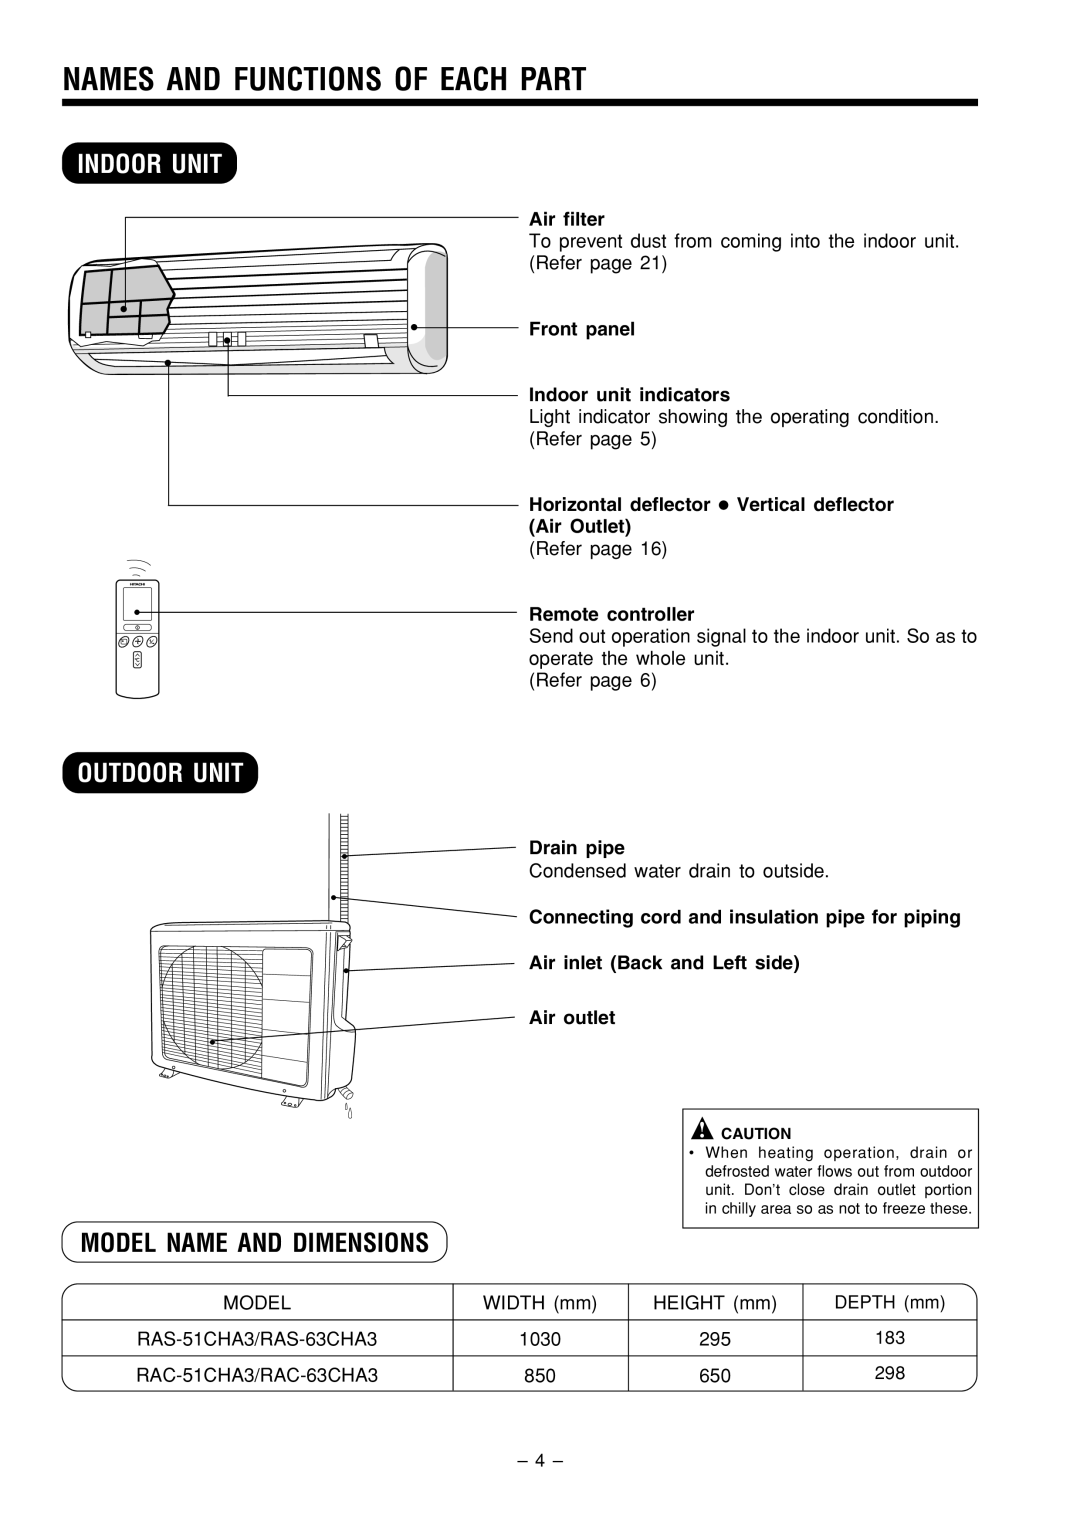 Hitachi RAS-51CHA3 Names And Functions Of Each Part, Indoor Unit, Outdoor Unit, Model Name And Dimensions, Air filter 